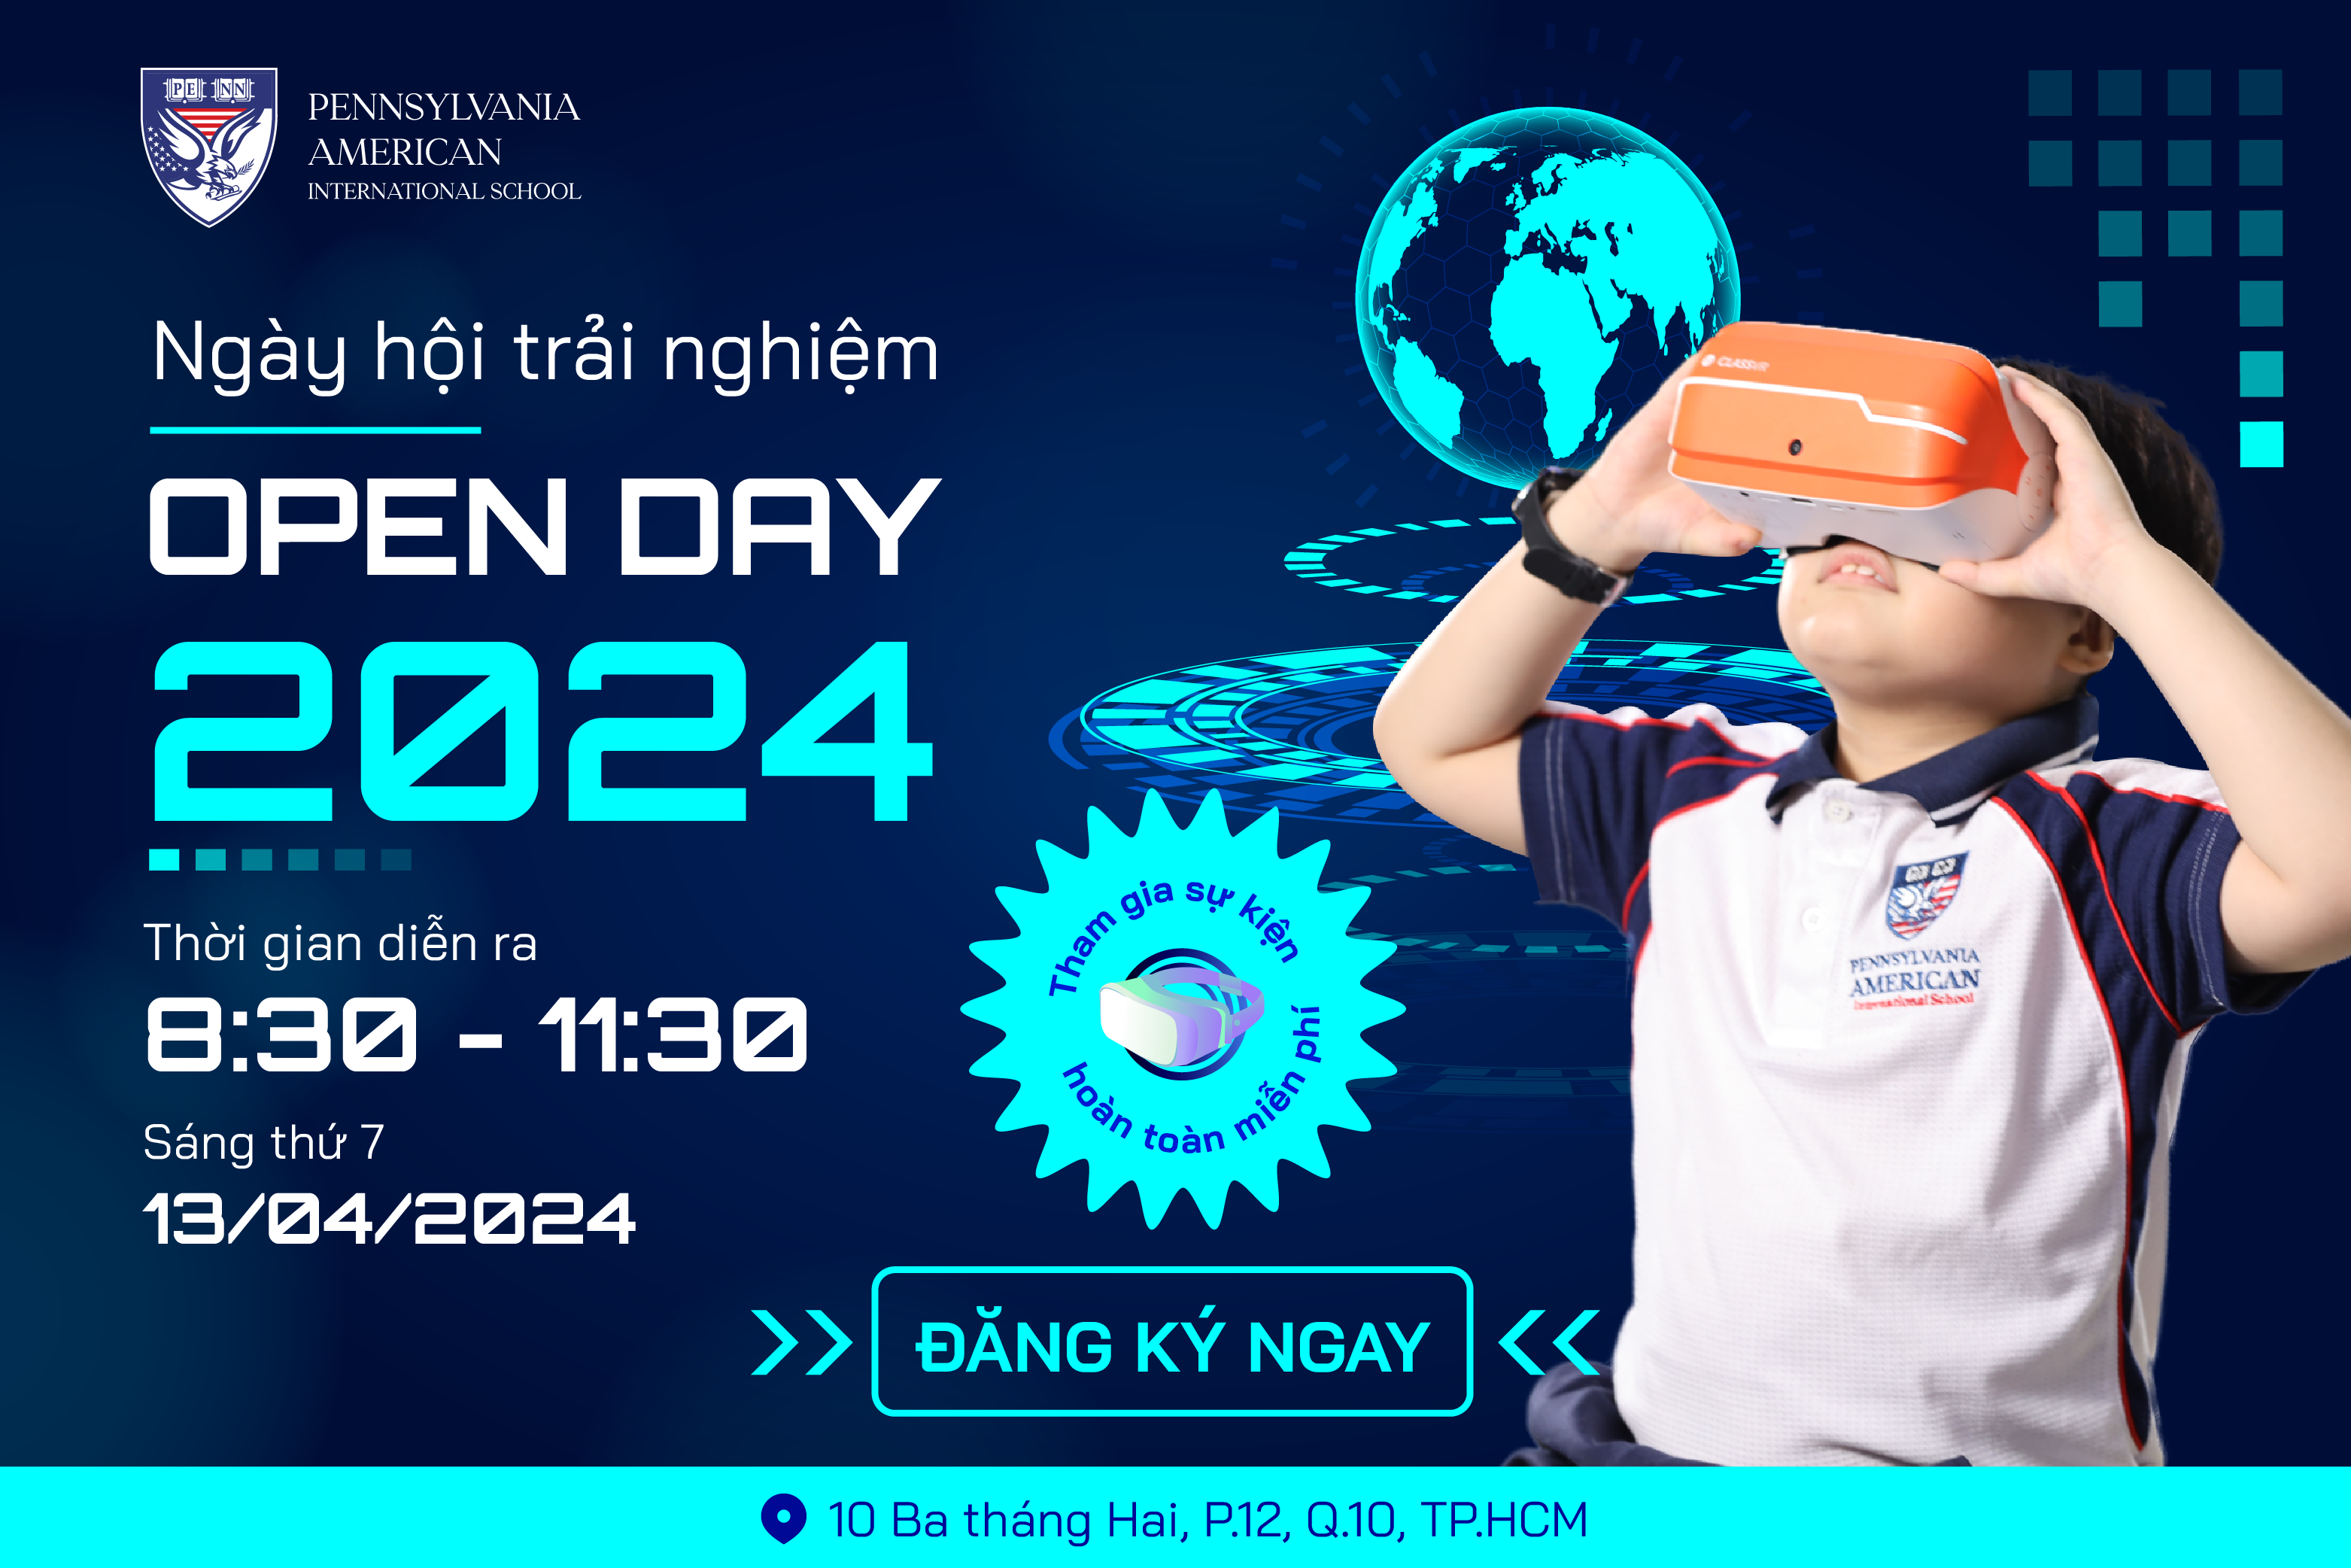 ngay-hoi-open-day-13-04-2024